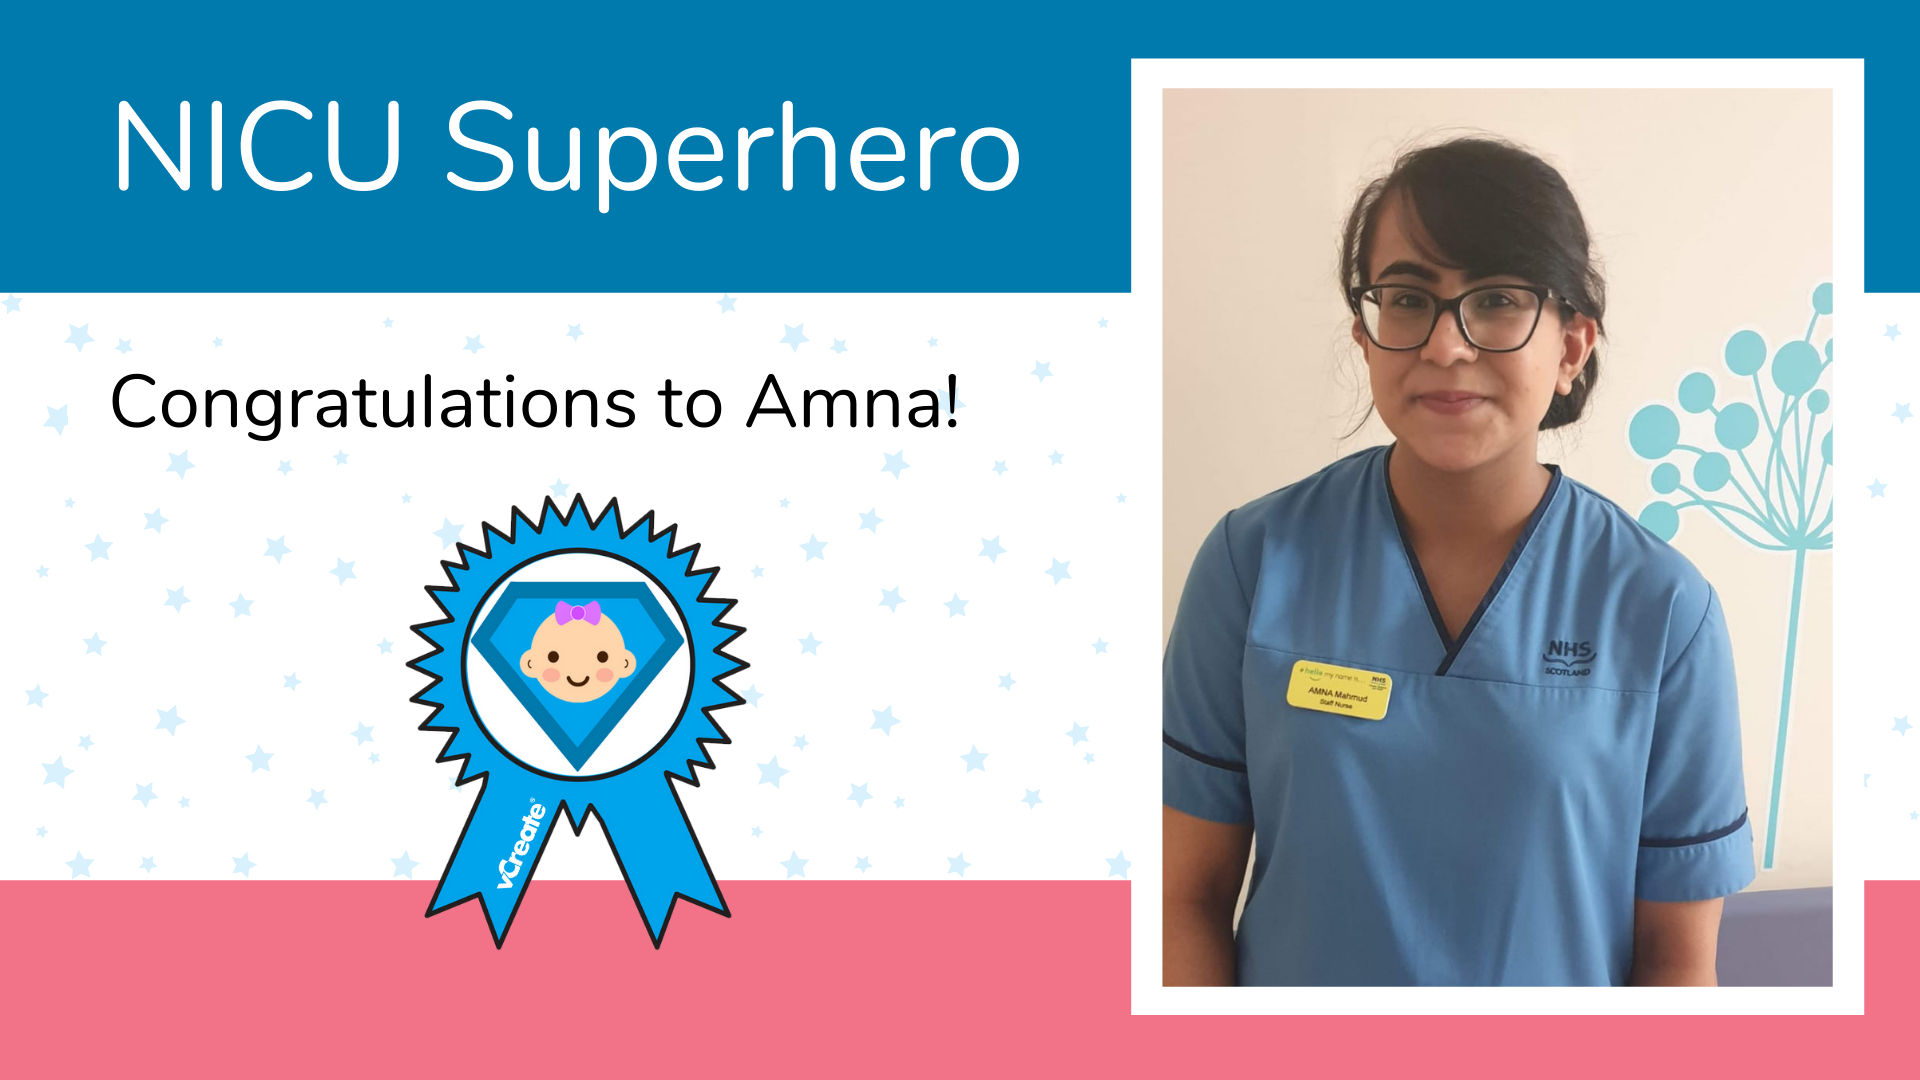 Amna from the Queen Elizabeth University Hospital in Glasgow is our NICU Superhero this week!